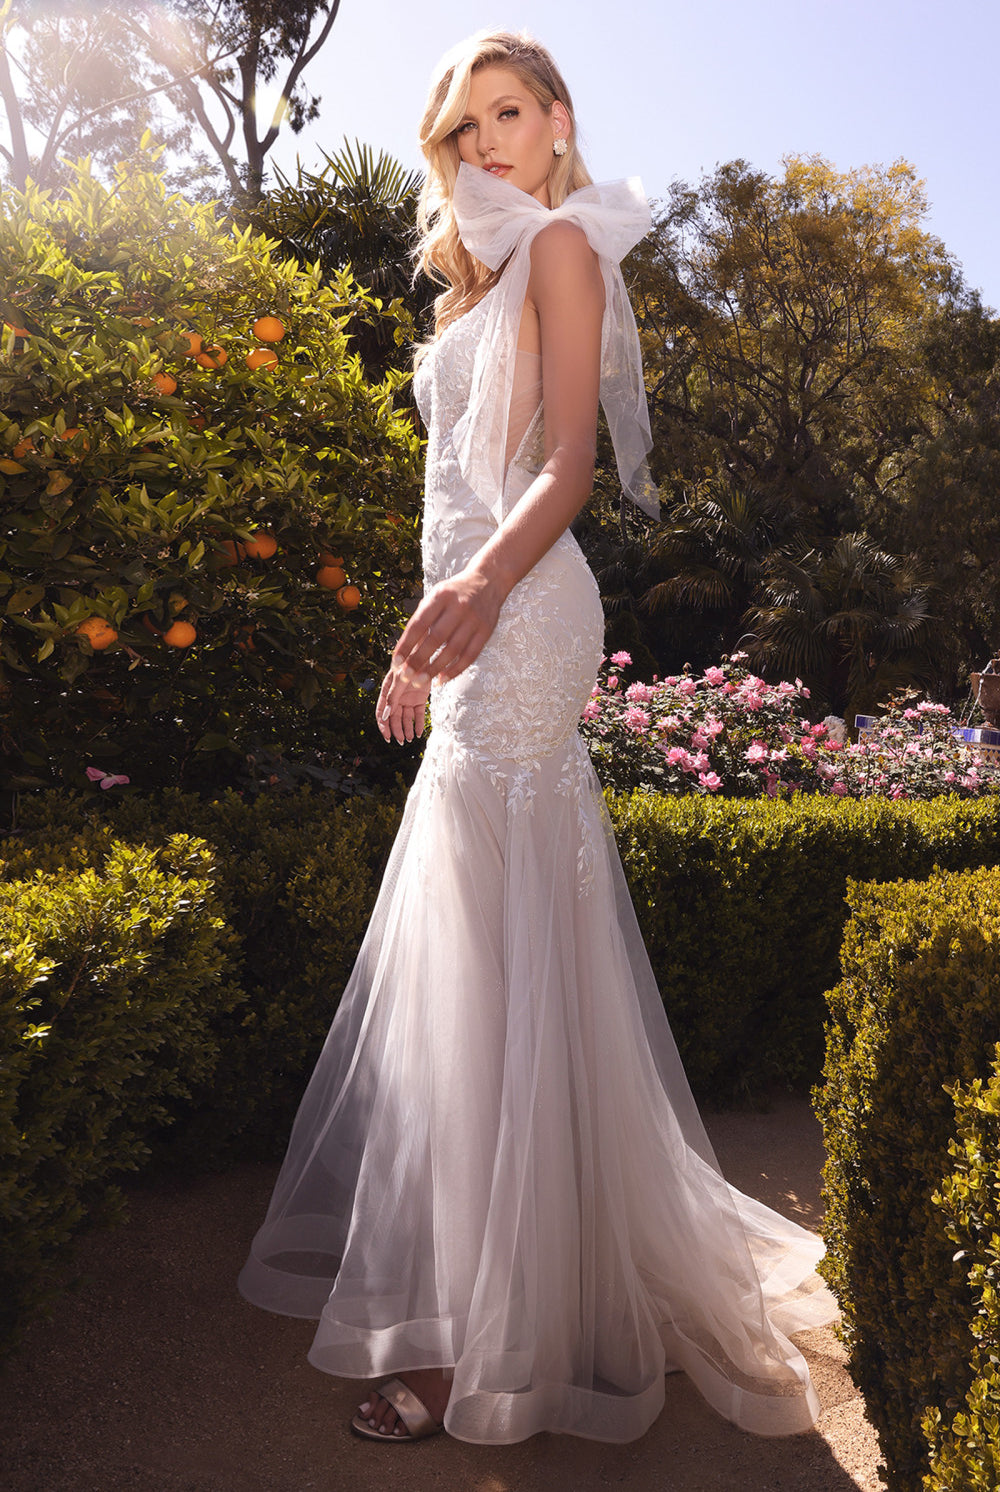 Elegant Mermaid Gown: Floral Embellishment, Fitted Bodice, Detachable Bow Straps-smcdress